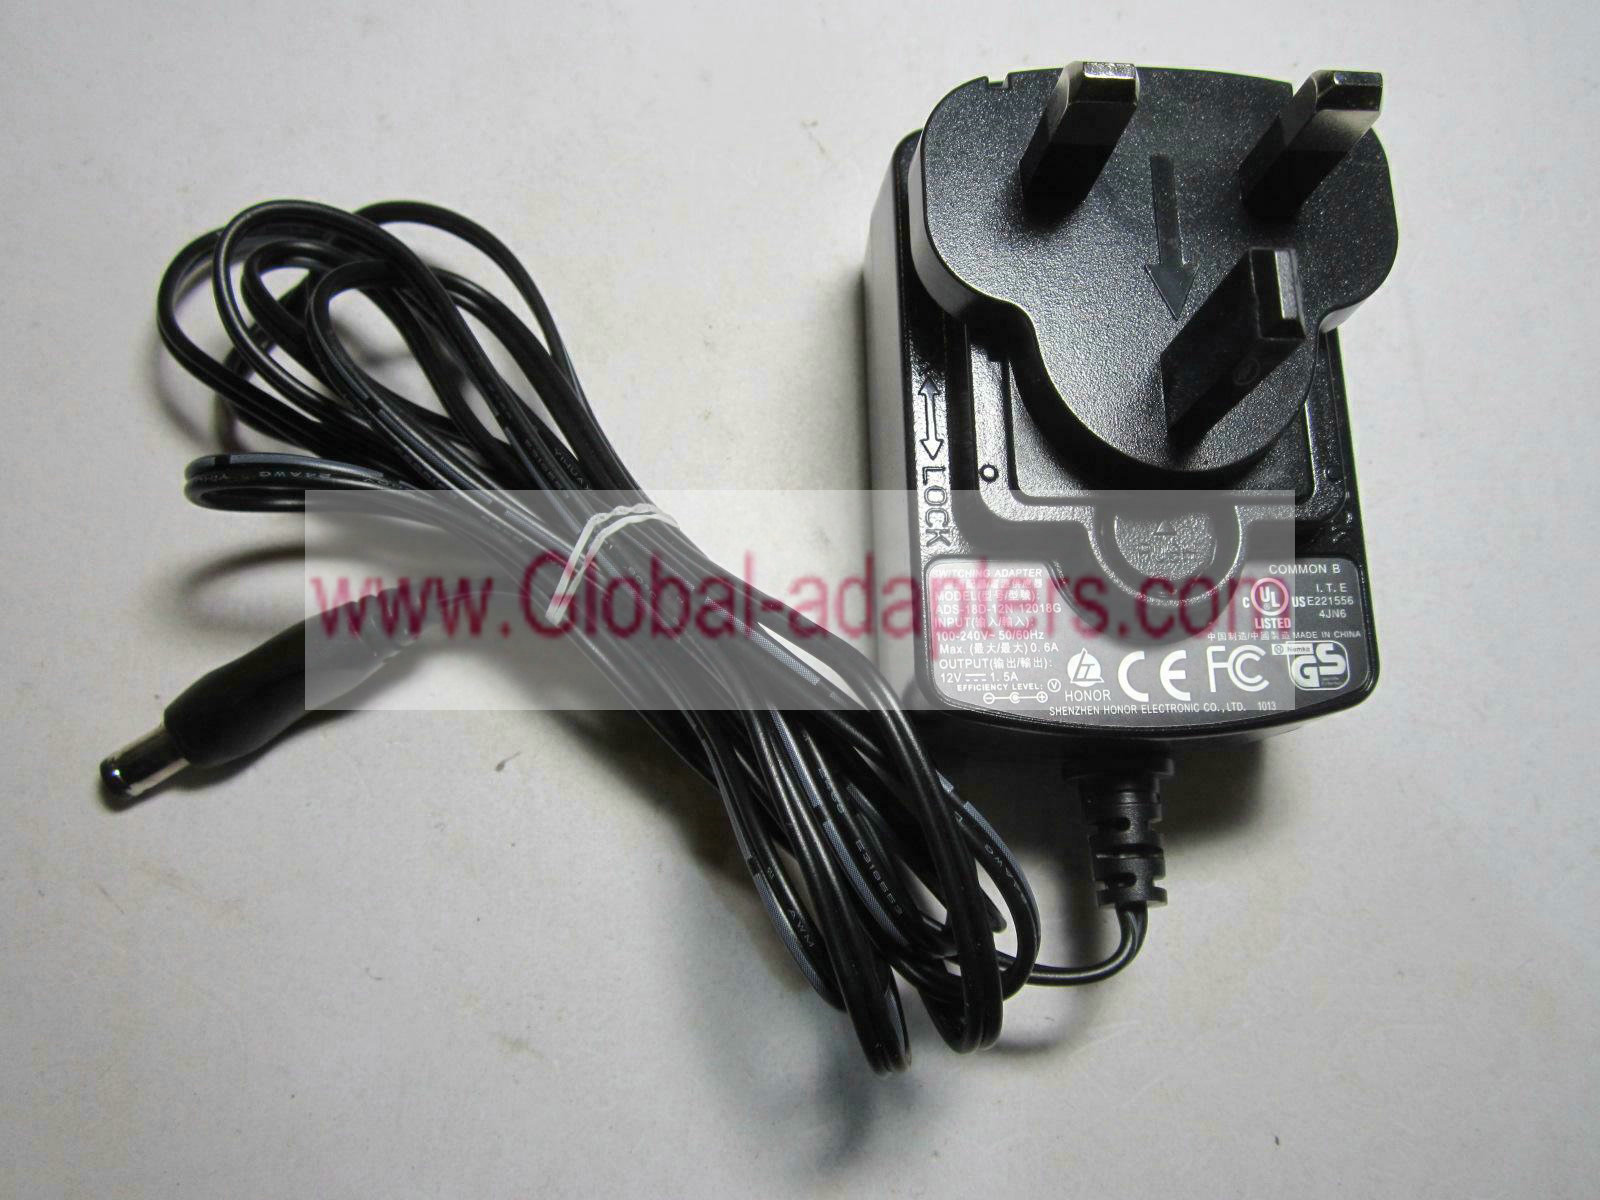 NEW 12V 1.5A AC/DC Adaptor Charger For DYS182-120150-10746H Power Supply UK plug - Click Image to Close